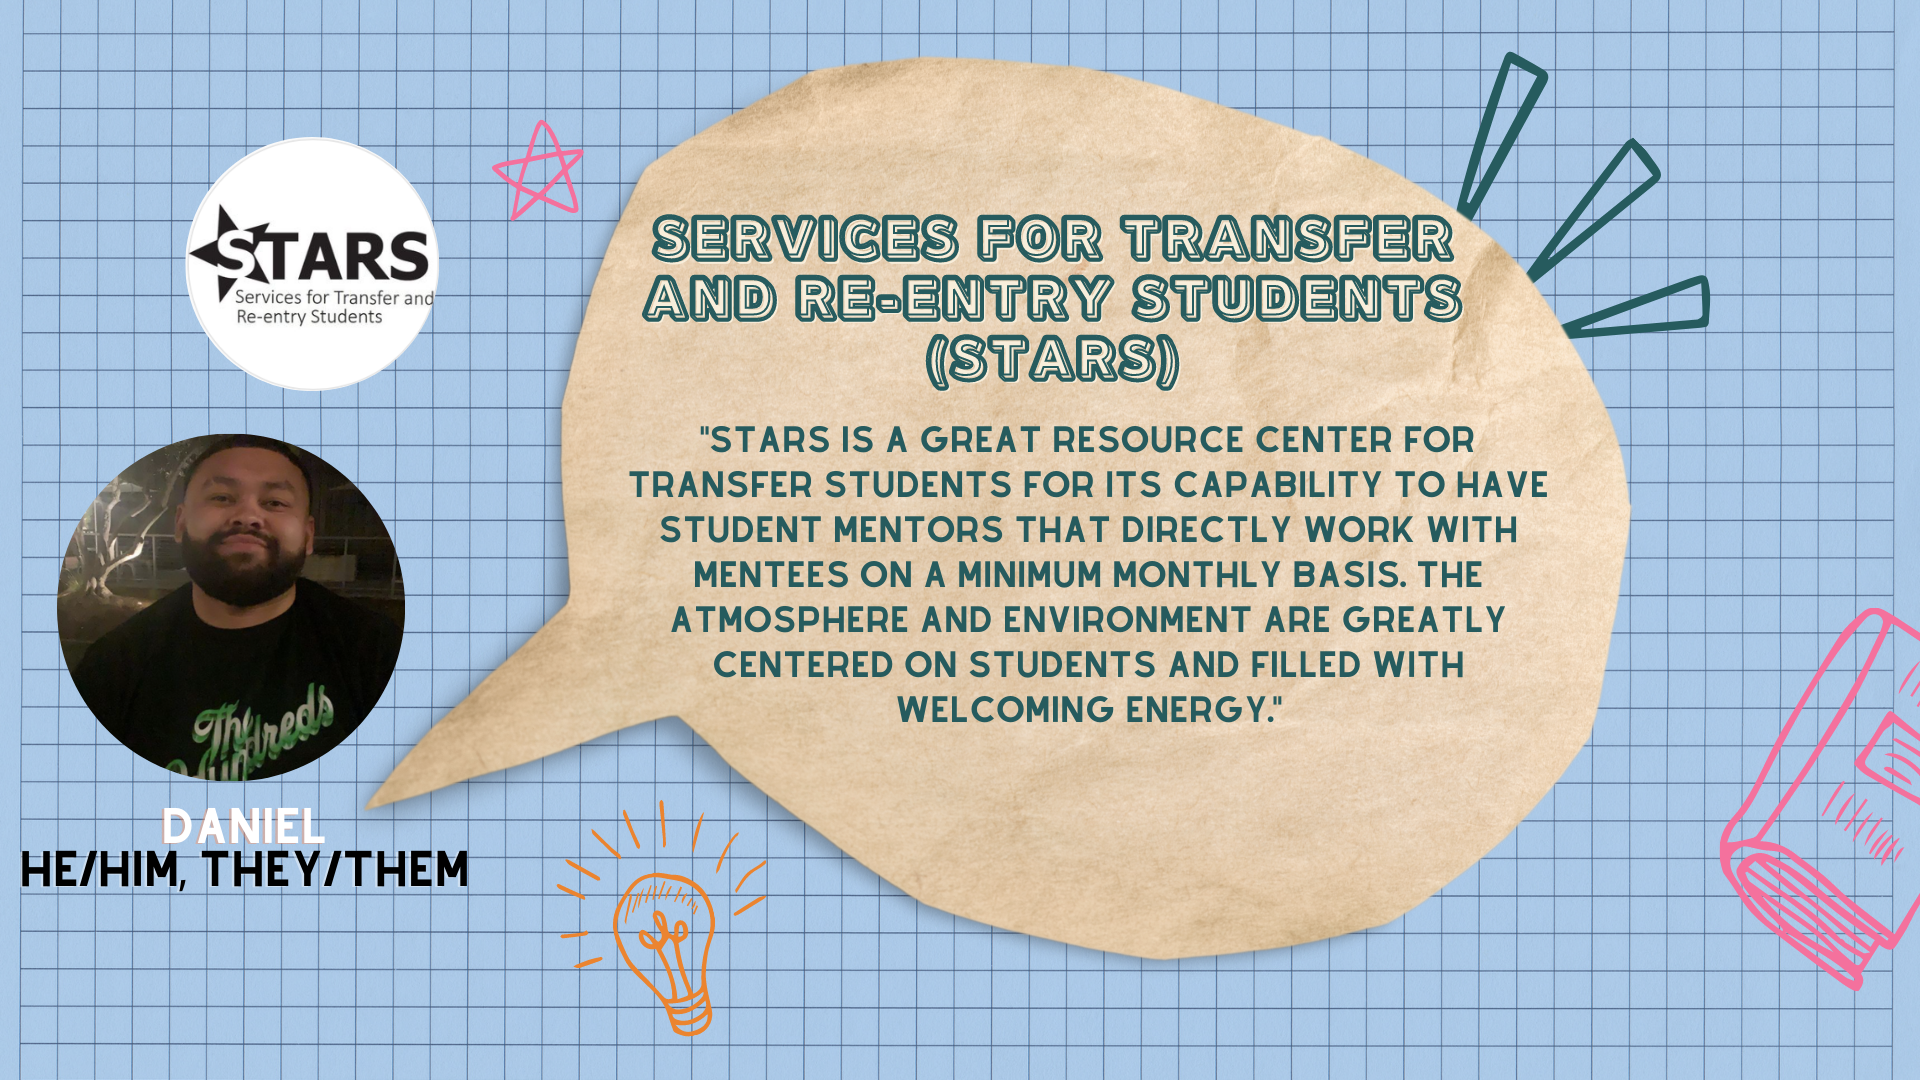 quote: "STARS is a great resource center for transfer students for its capability to have student mentors that directly work with mentees on a minimum monthly basis. The atmosphere and environment are greatly centered on students and filled with welcoming energy."